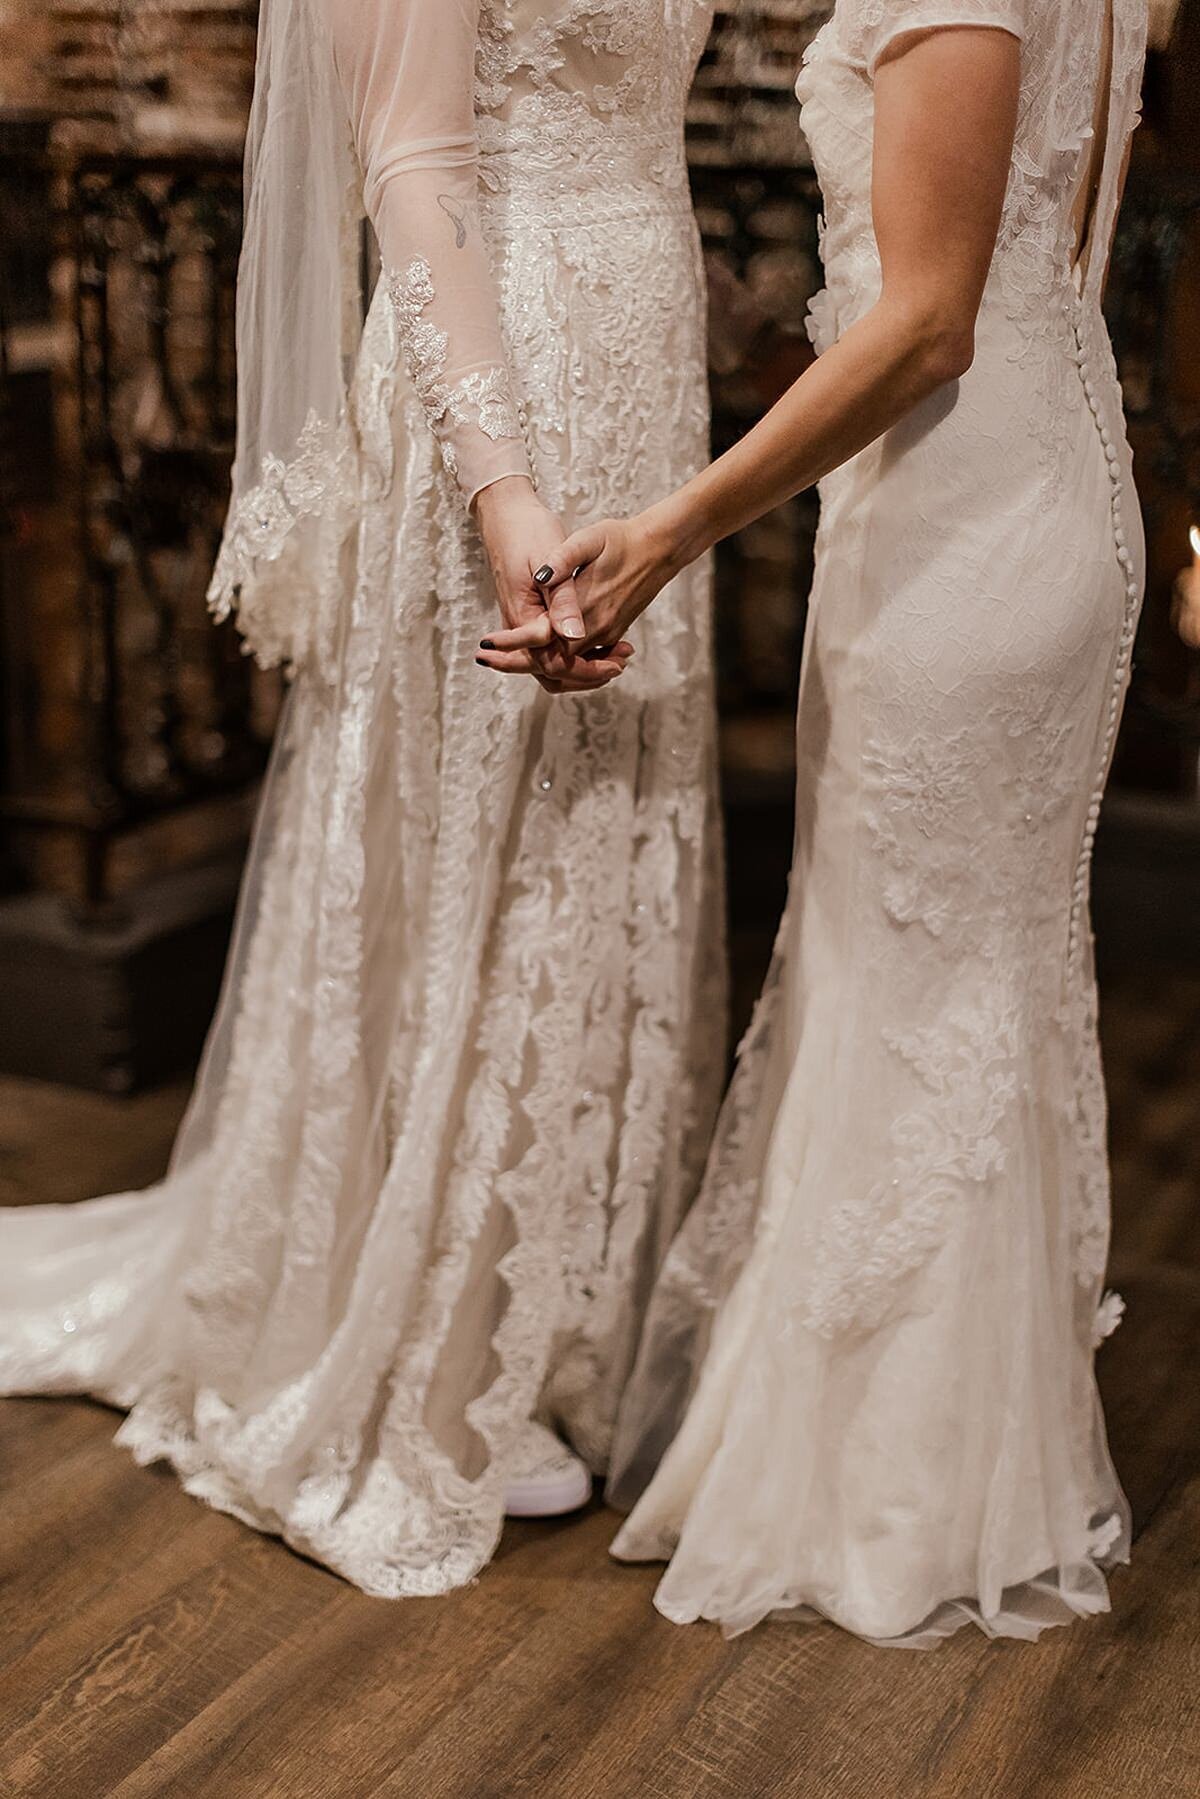 A bride wearing an ivory long sleeved lace wedding gown and veil holds hands with a bride wearing a white wedding gown with a lace overlay and tiny buttons down the back.